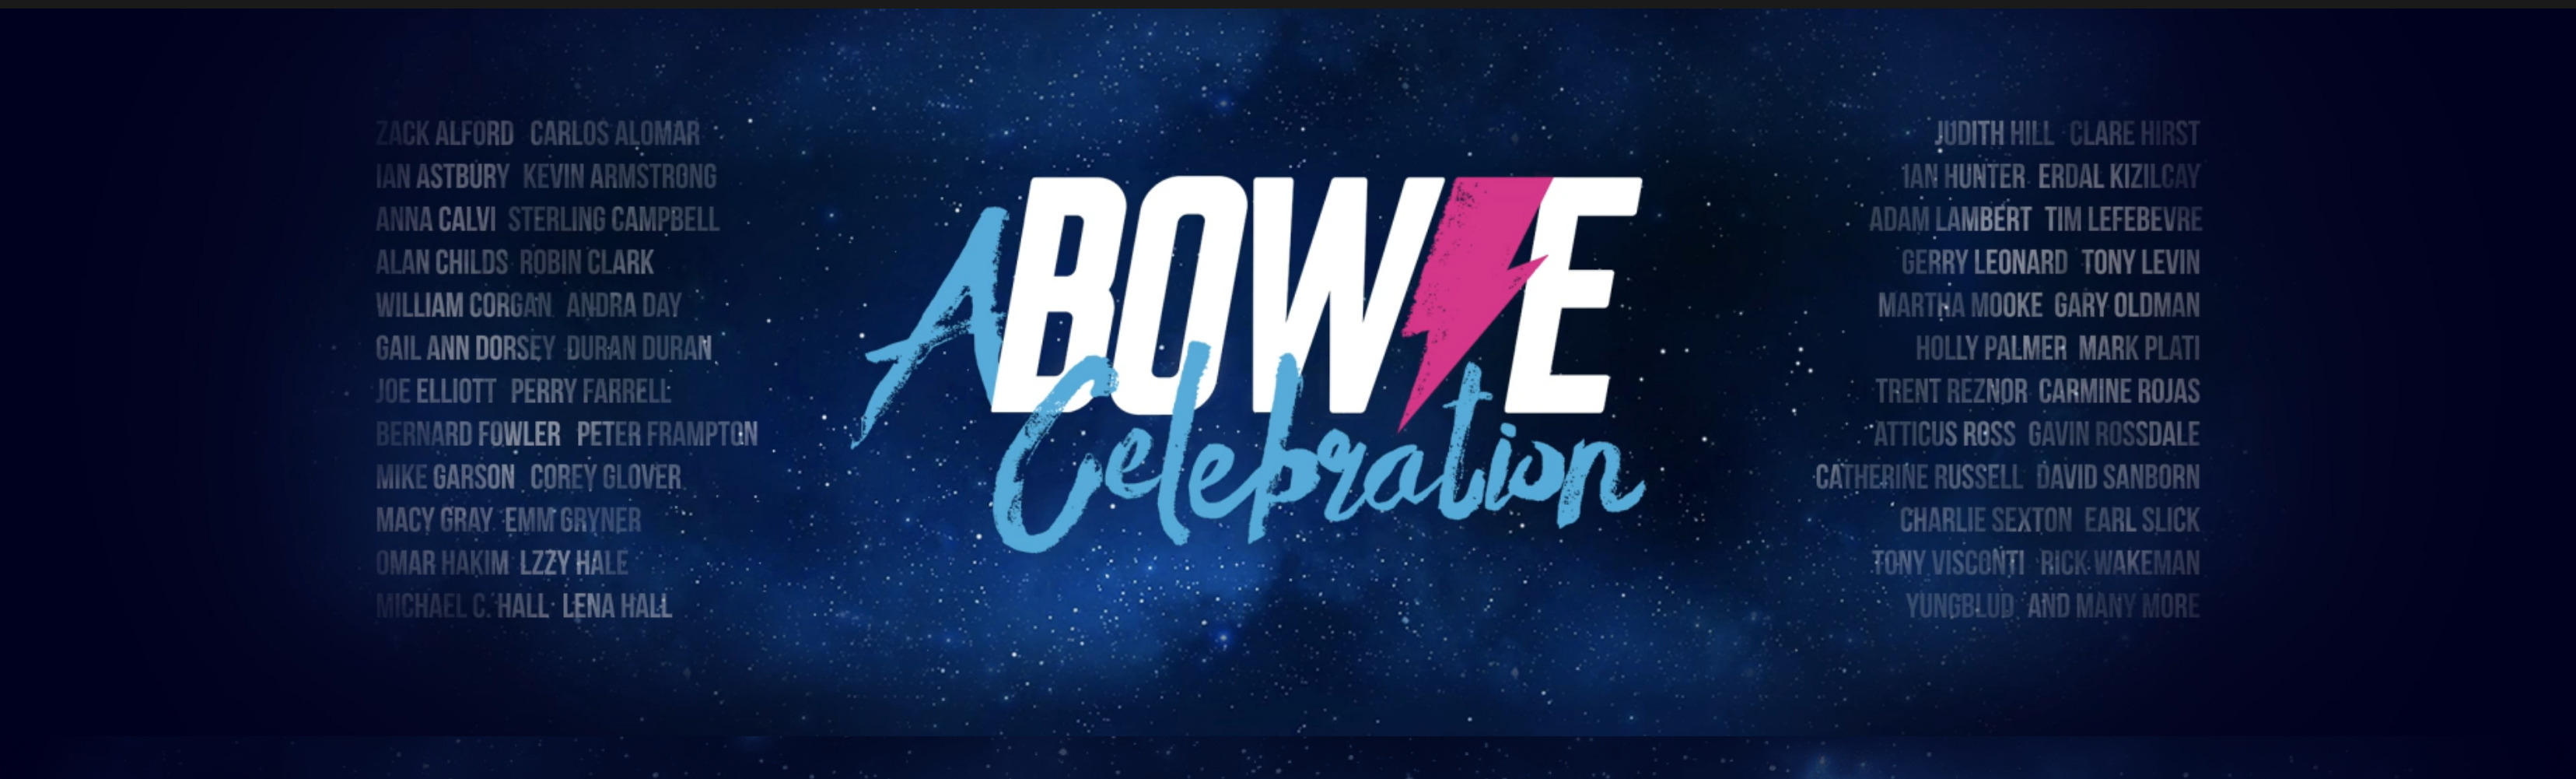 HYFI to host ‘A Bowie Celebration: Just For One Day!’ on January 8